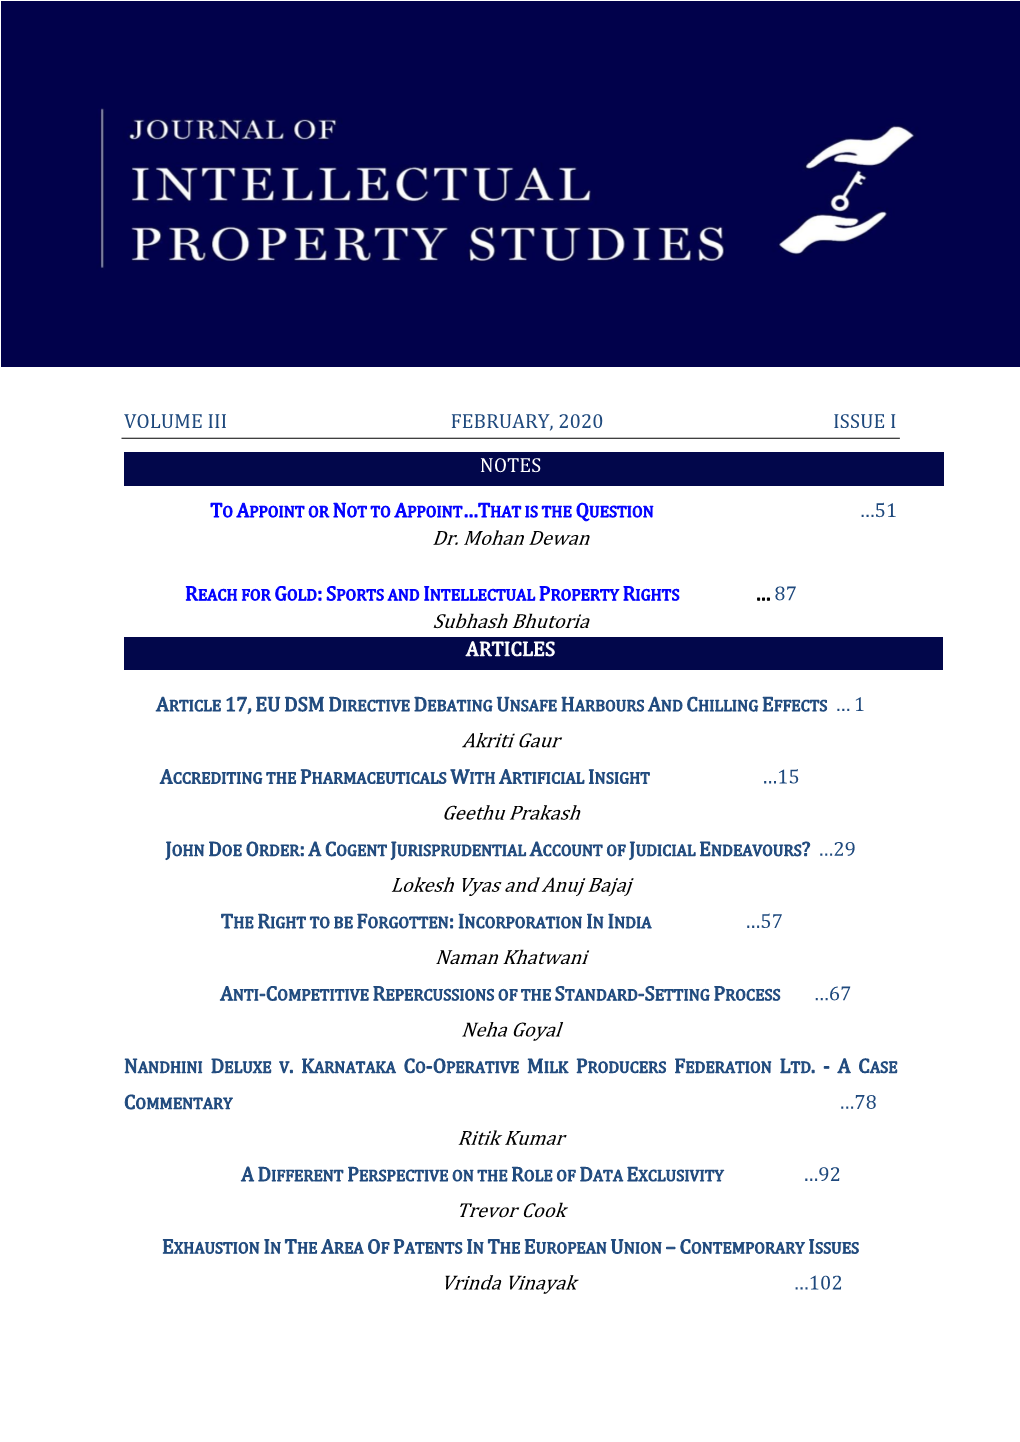 JOURNAL of INTELLECTUAL PROPERTY STUDIES [Issue I]